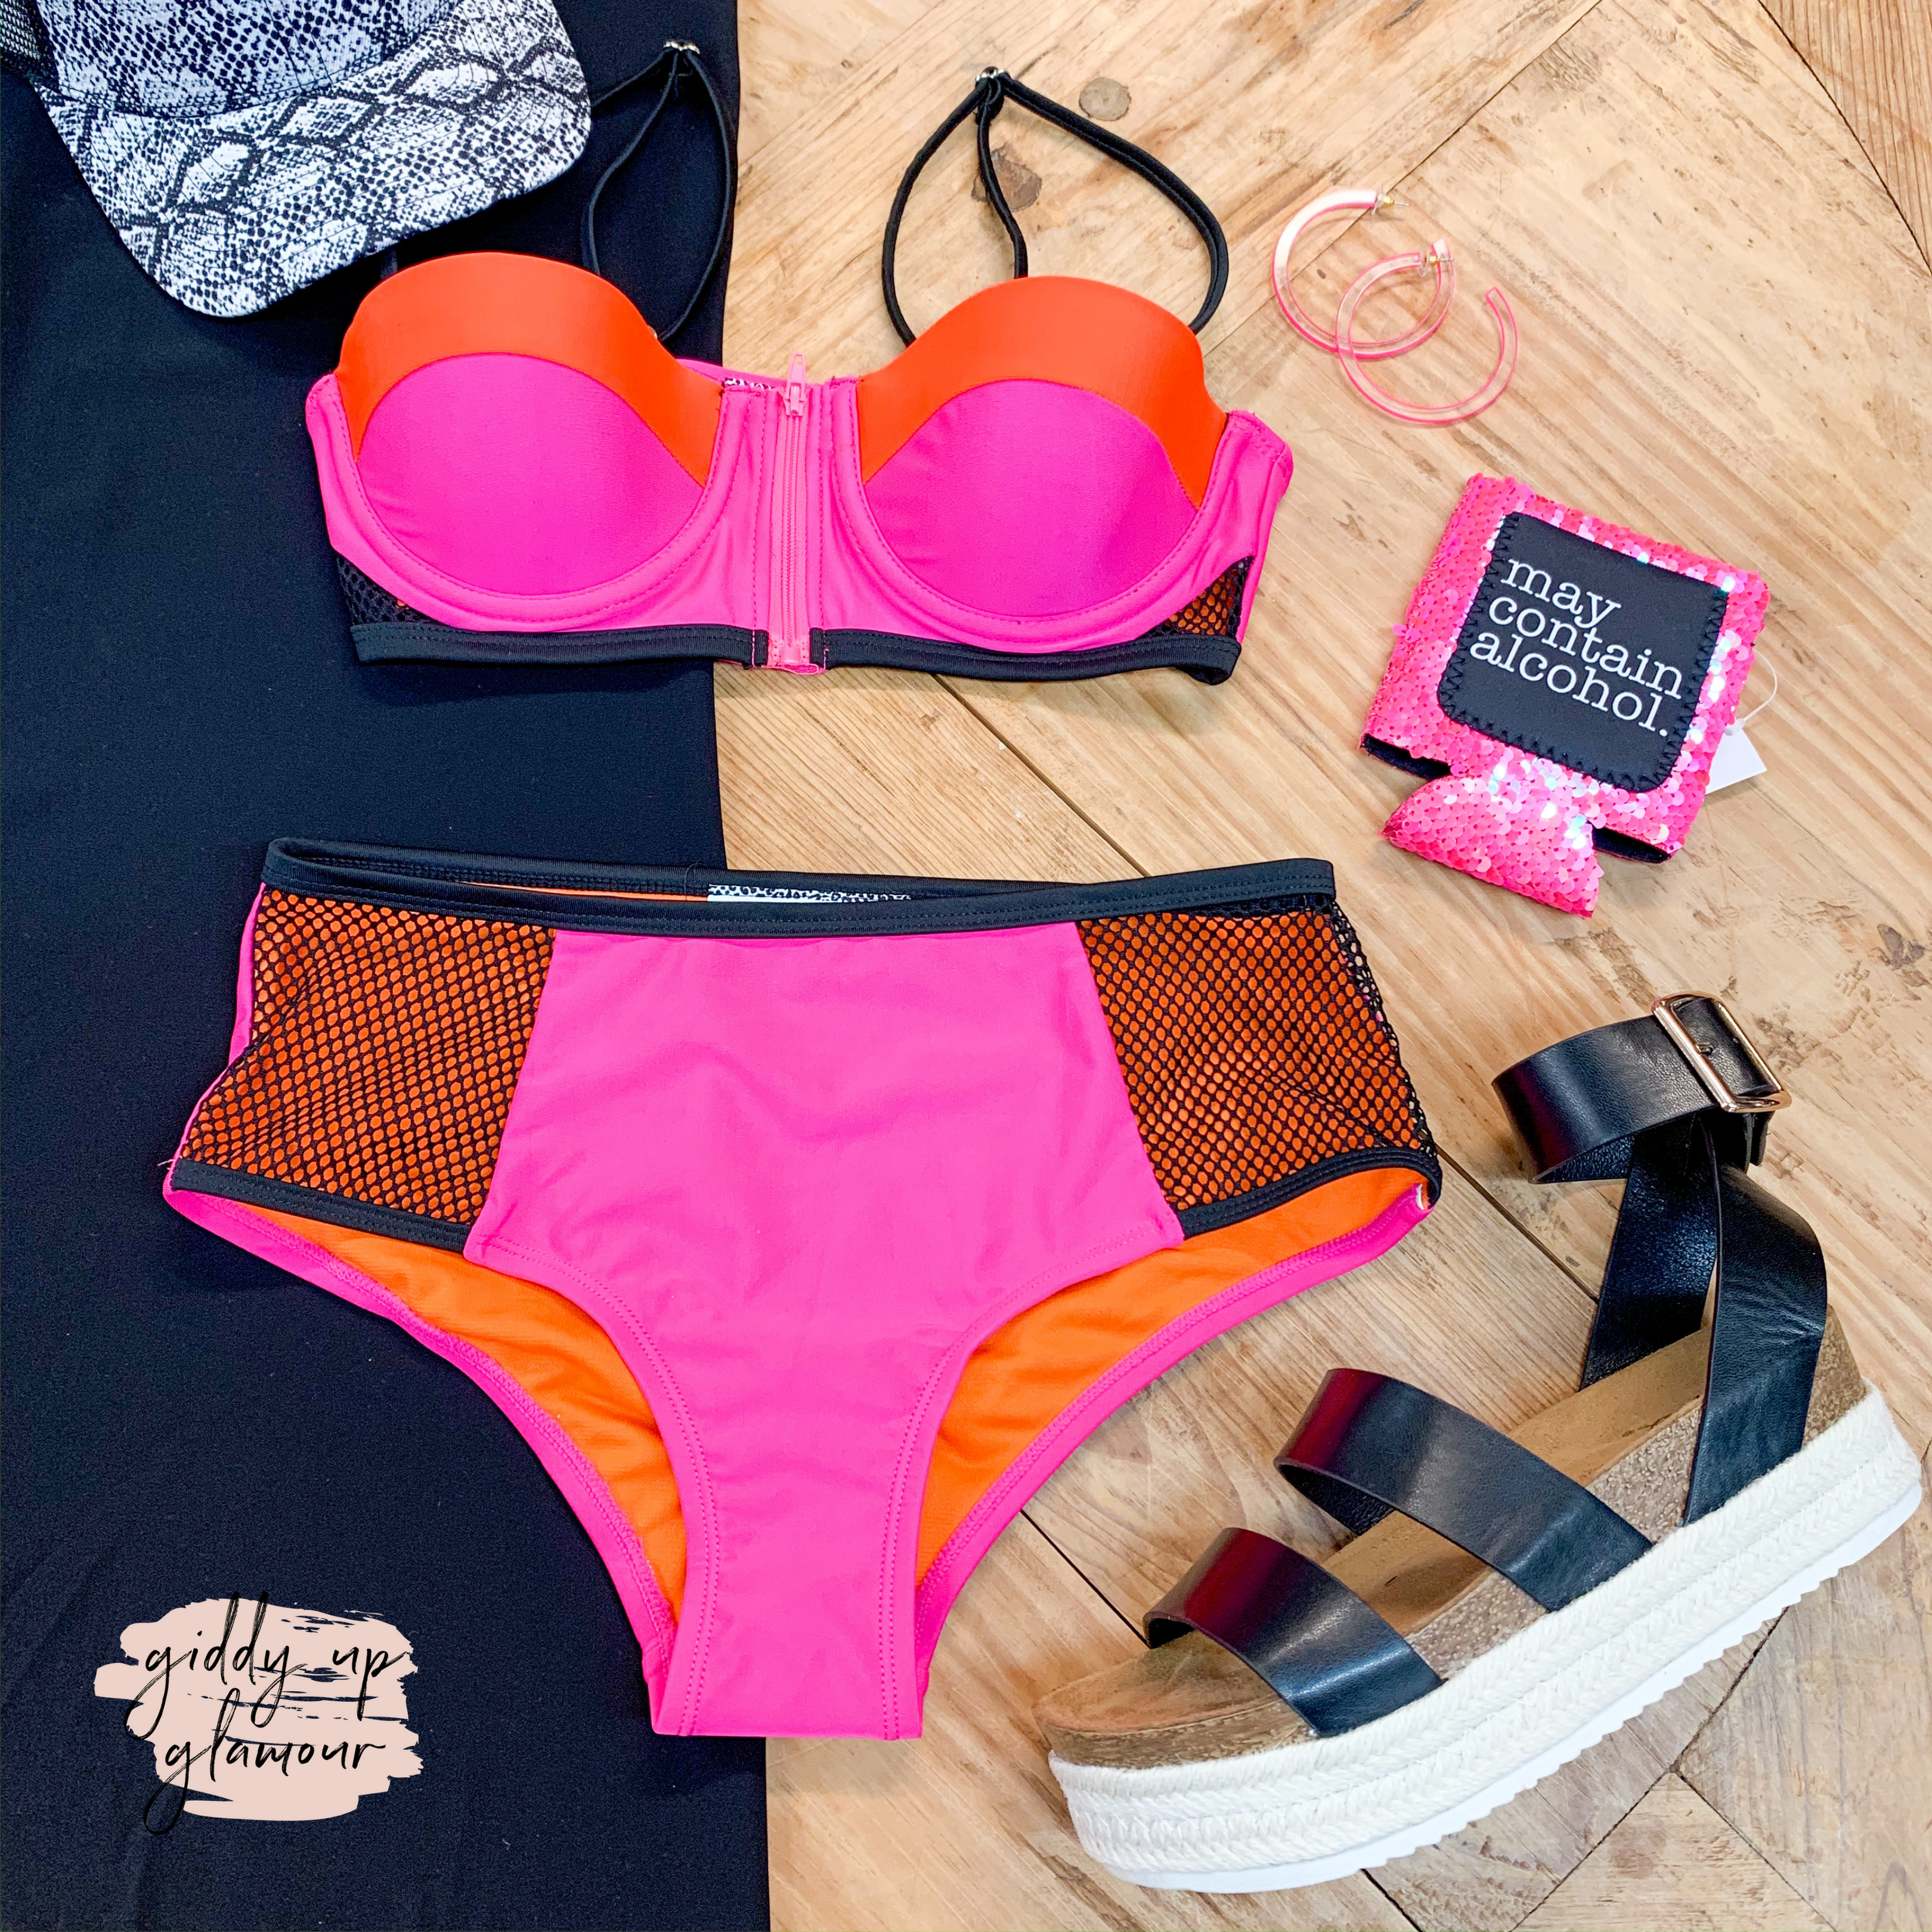 Sun Kissed Color Block Bikini Bottoms with Mesh in Orange and Pink - Giddy Up Glamour Boutique